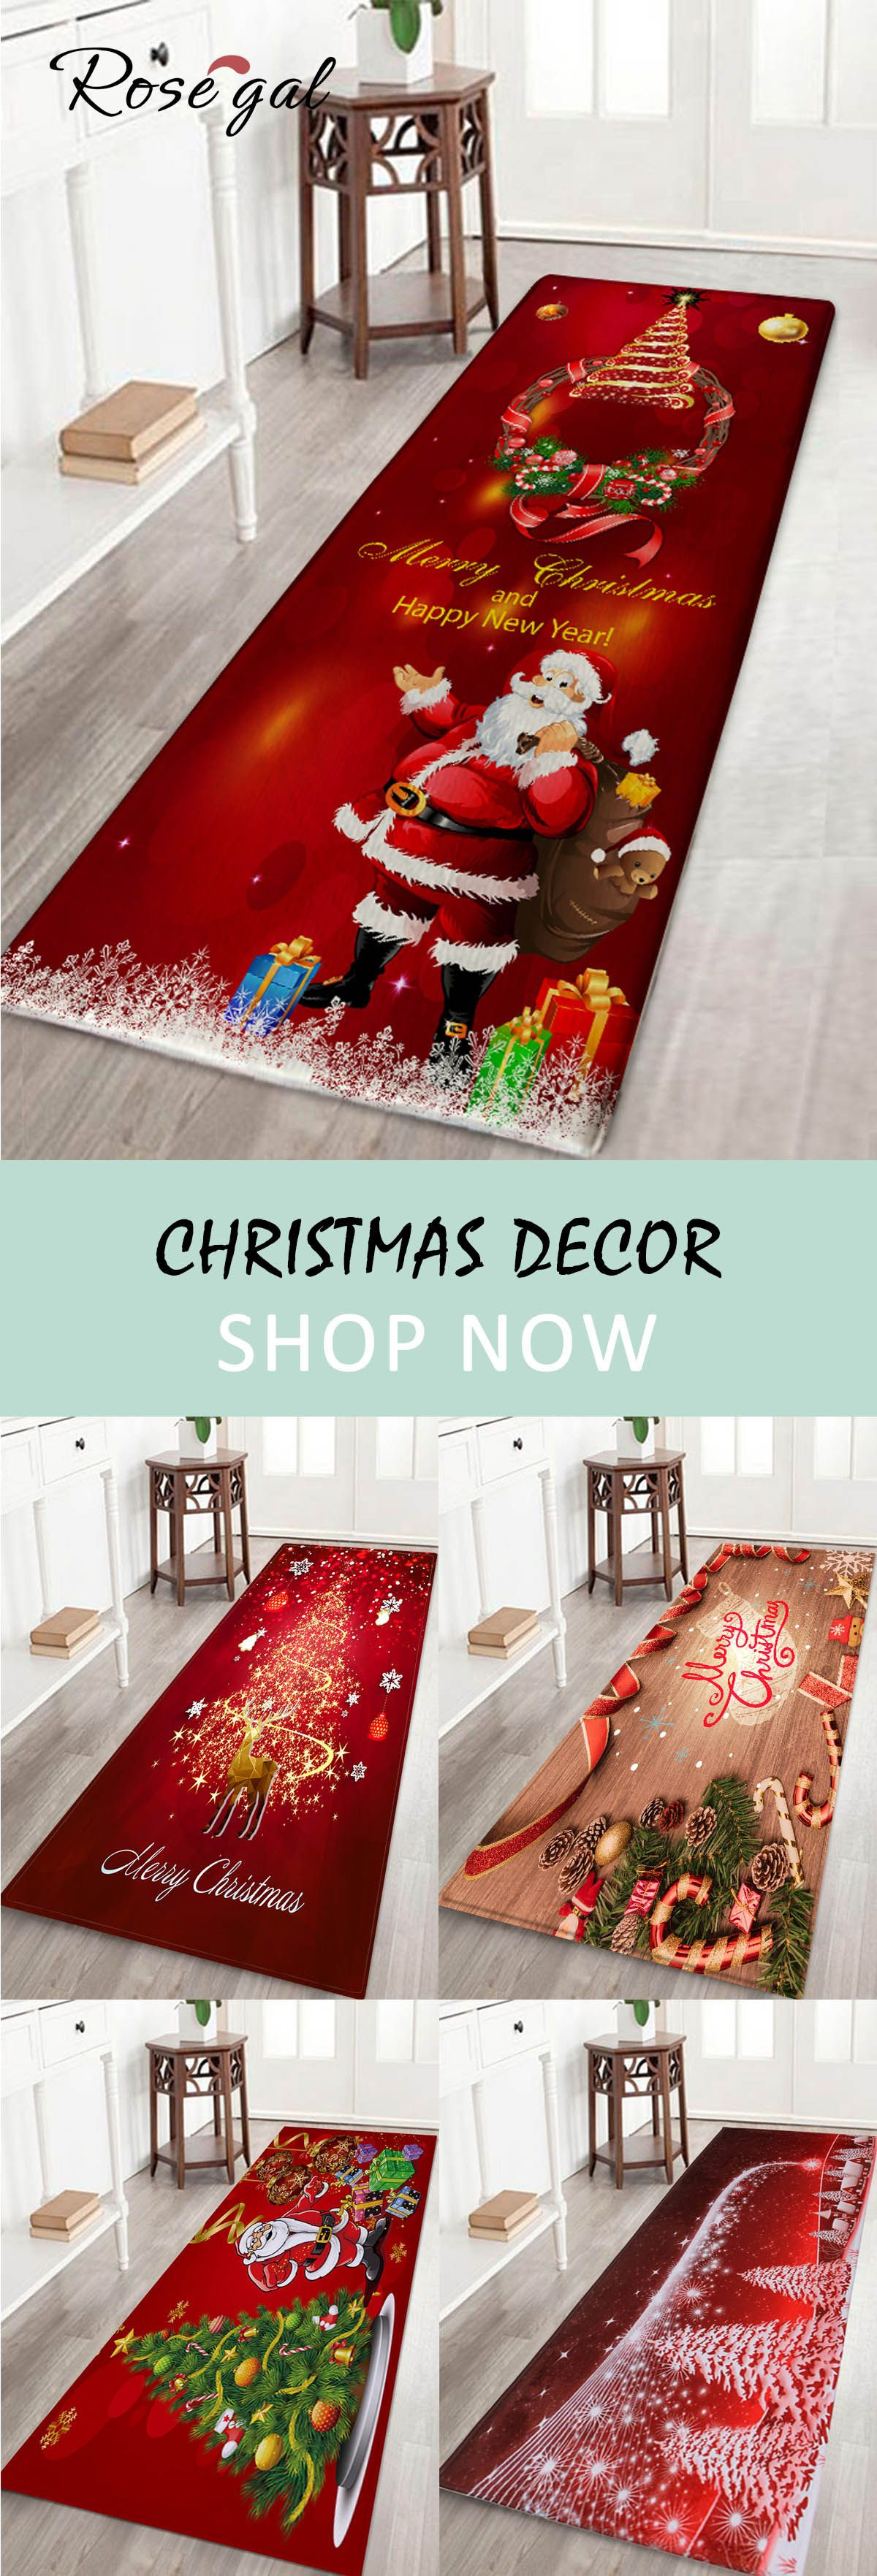 Christmas Floor Decorations
 Up to off Rosegal Christmas home decor floor